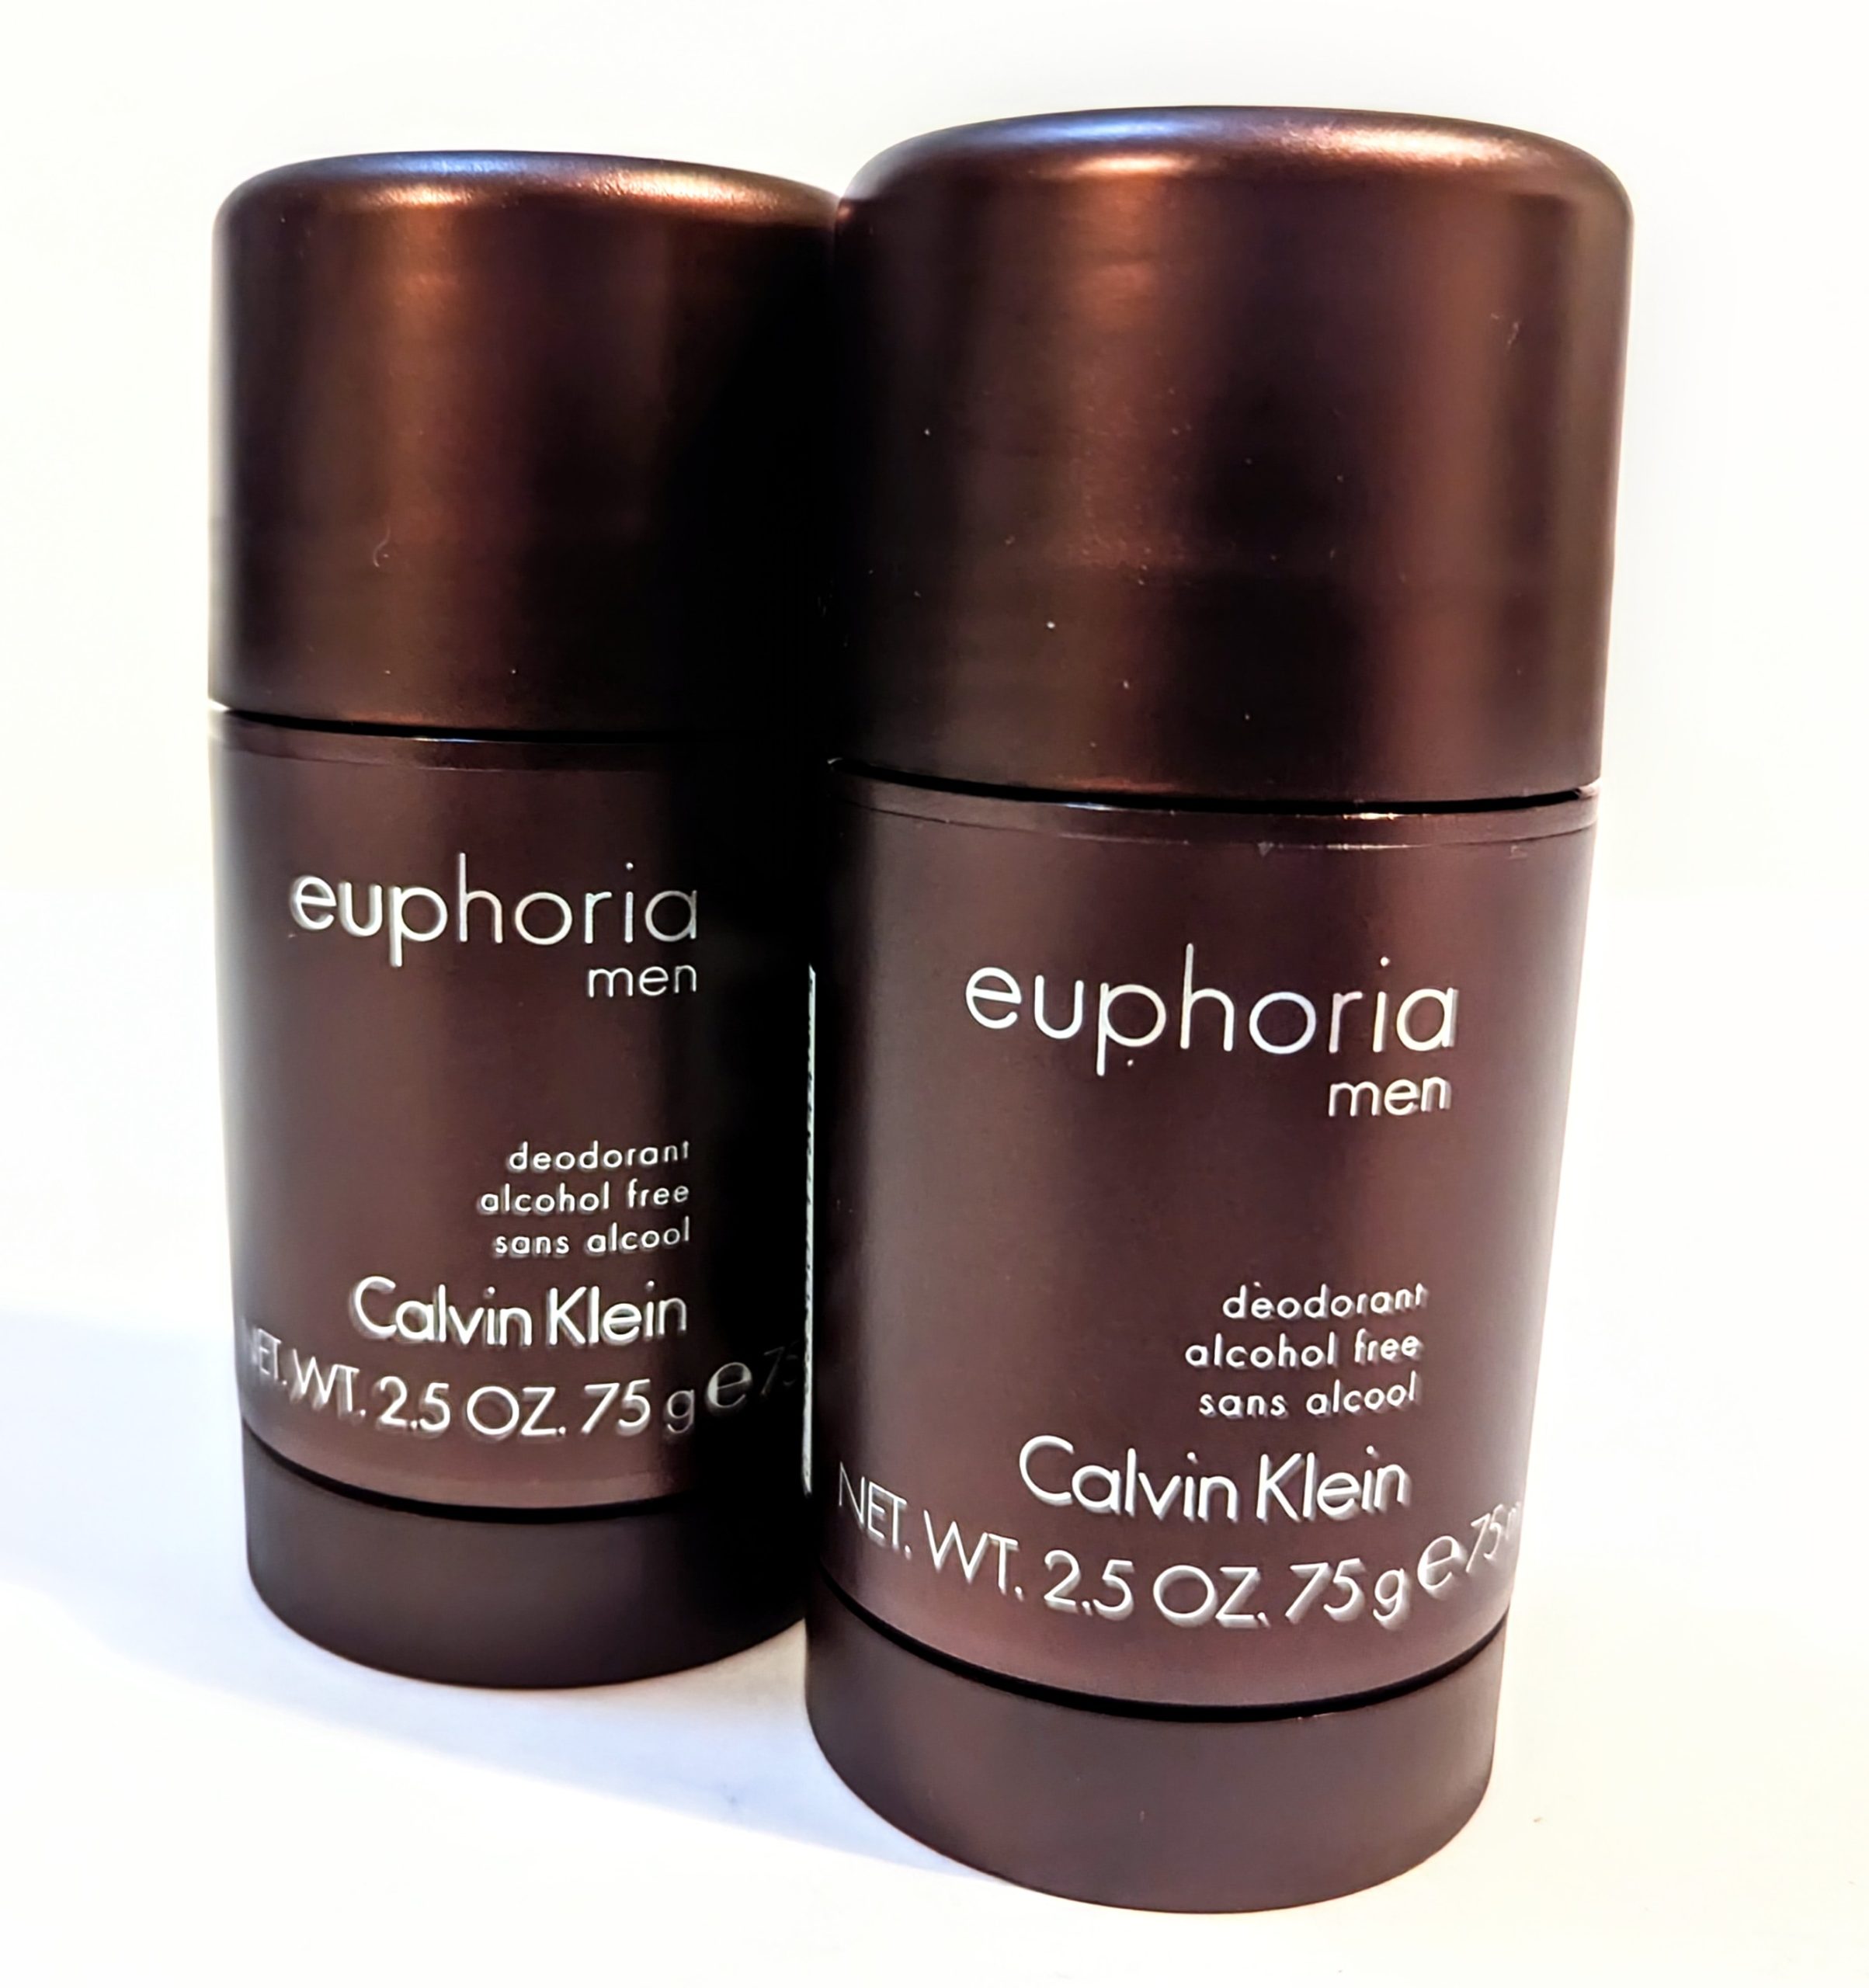 Two brown stick deodorants with the label “Euphoria Men” by Calvin Klein are displayed side by side. Each is 2.5 oz (75 g) and marked as alcohol-free.